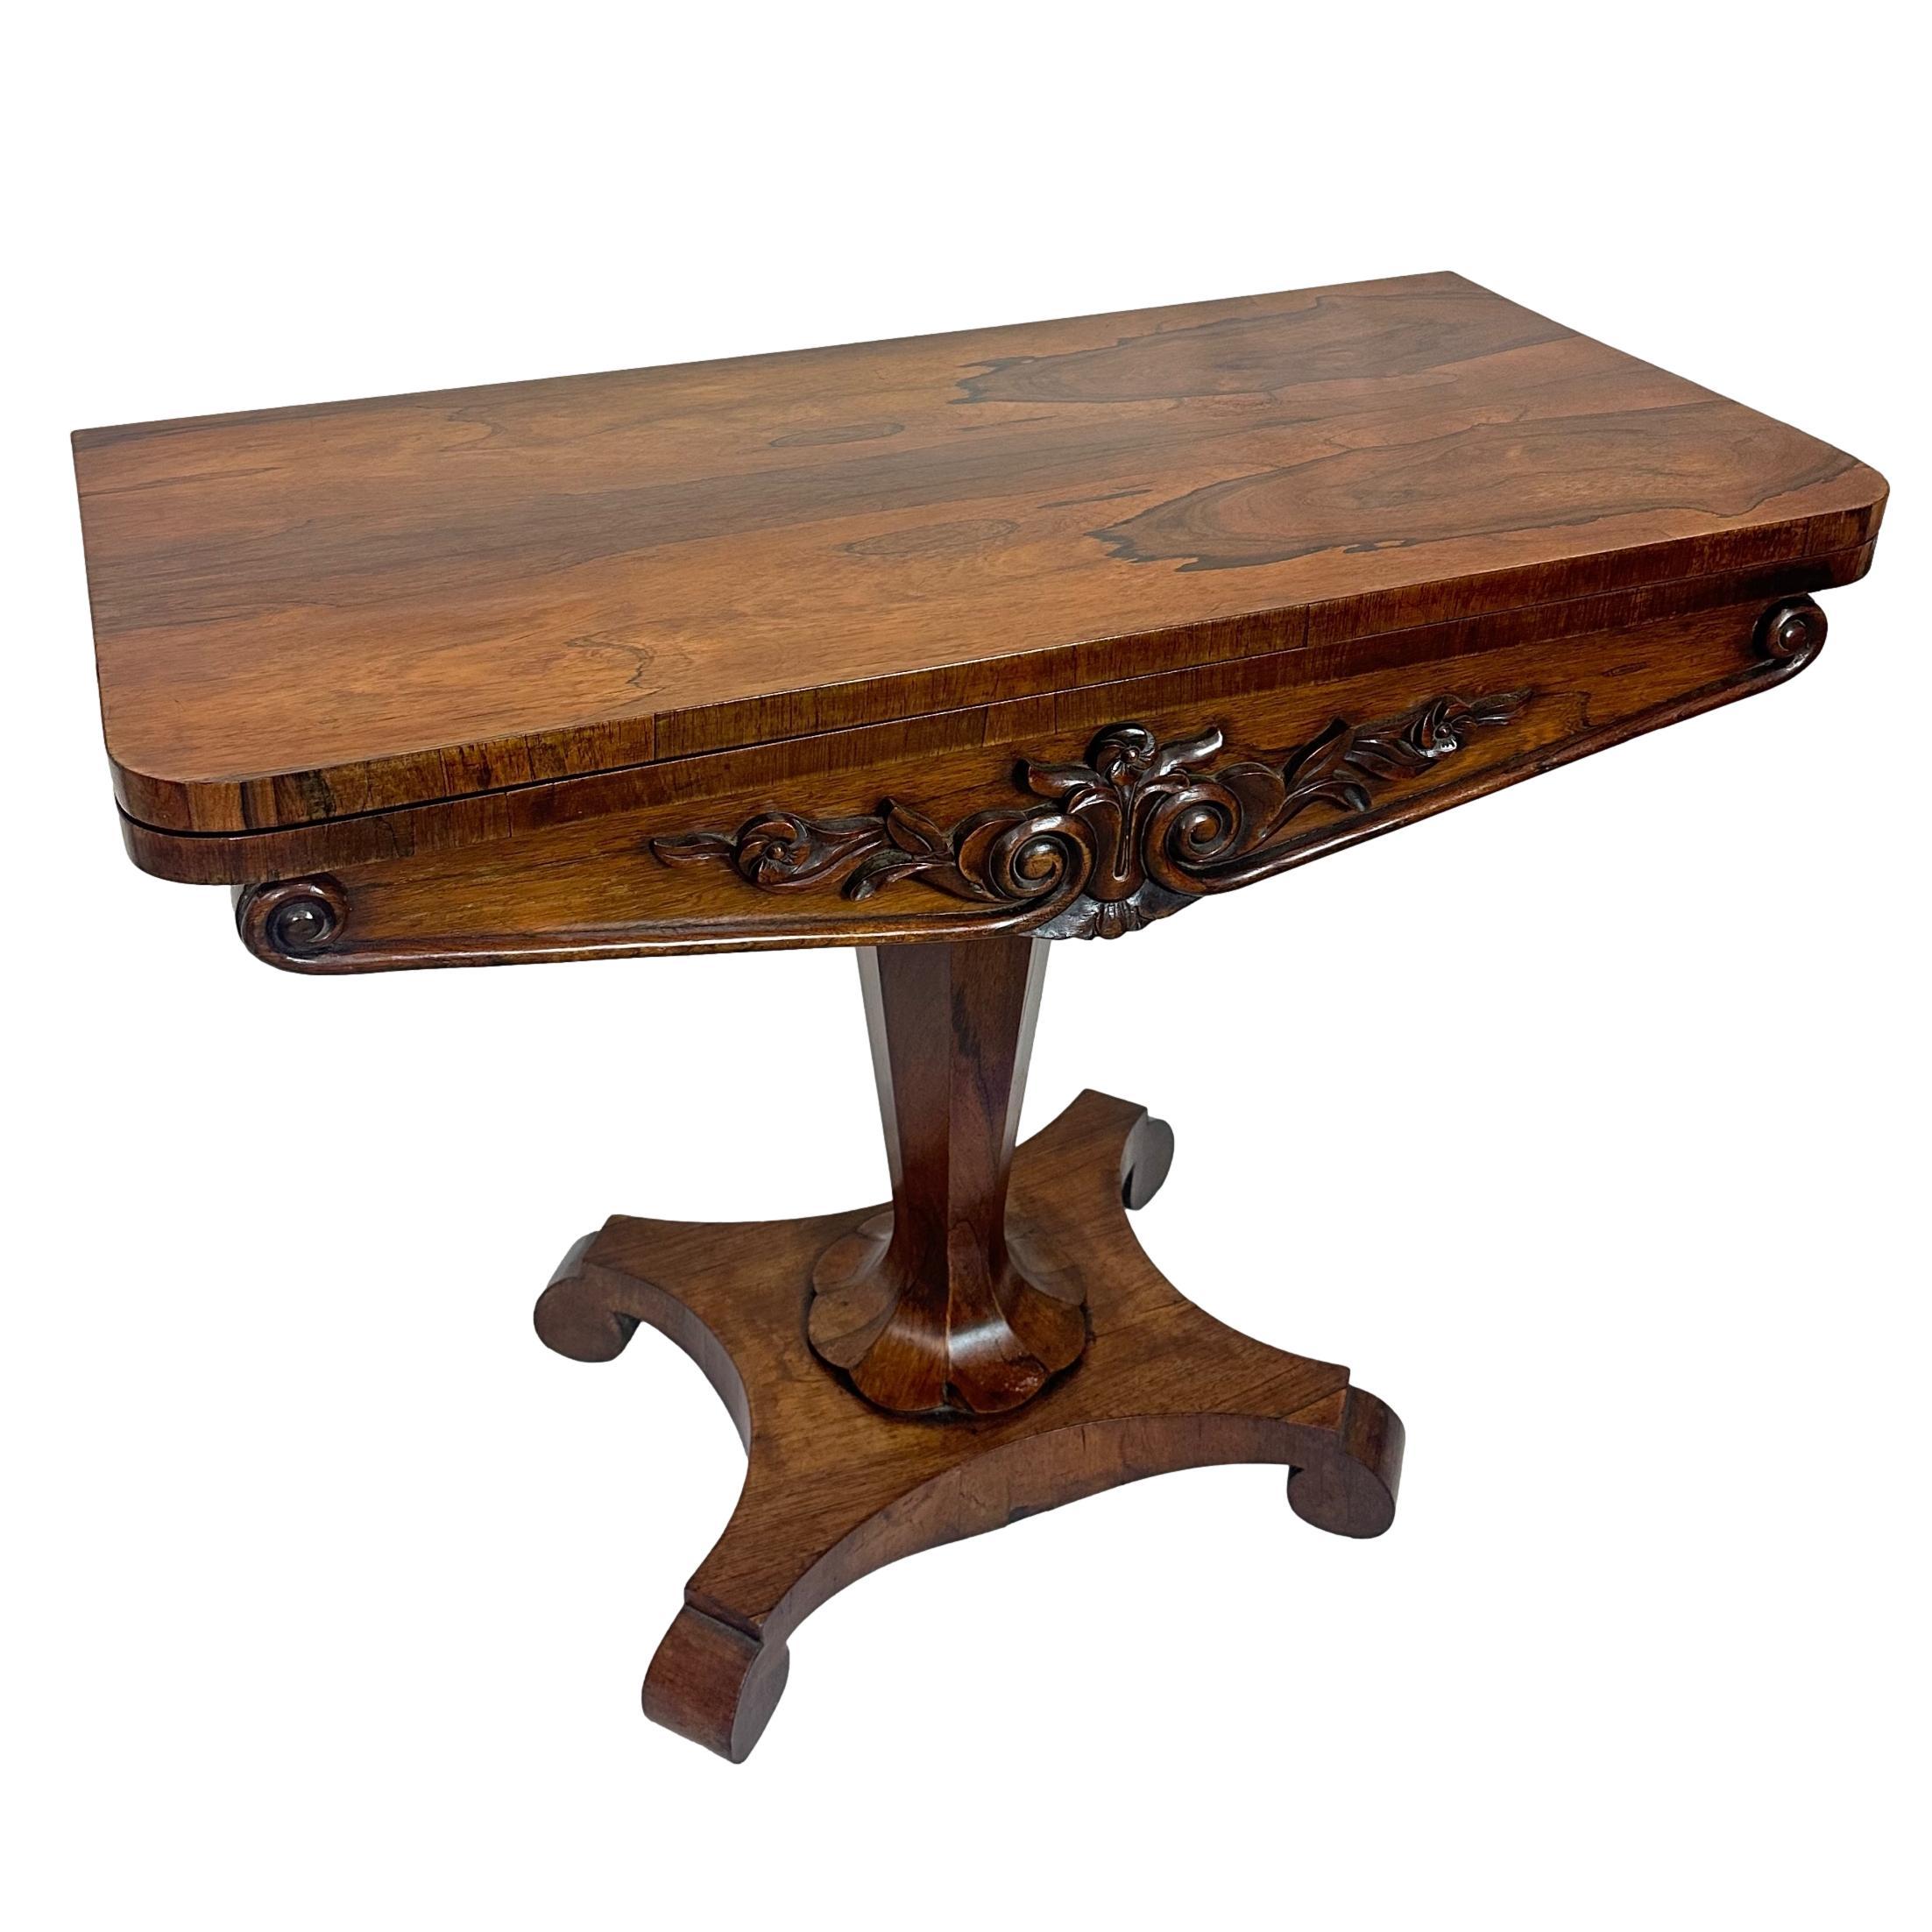 An Antique William IV Rosewood Period Card Table and Side Table, the stunning figured rosewood top is beautifully preserved and French polished,  the apron/frieze with carved roses and leaves.  The central column formed as a tapered, flower-bottomed